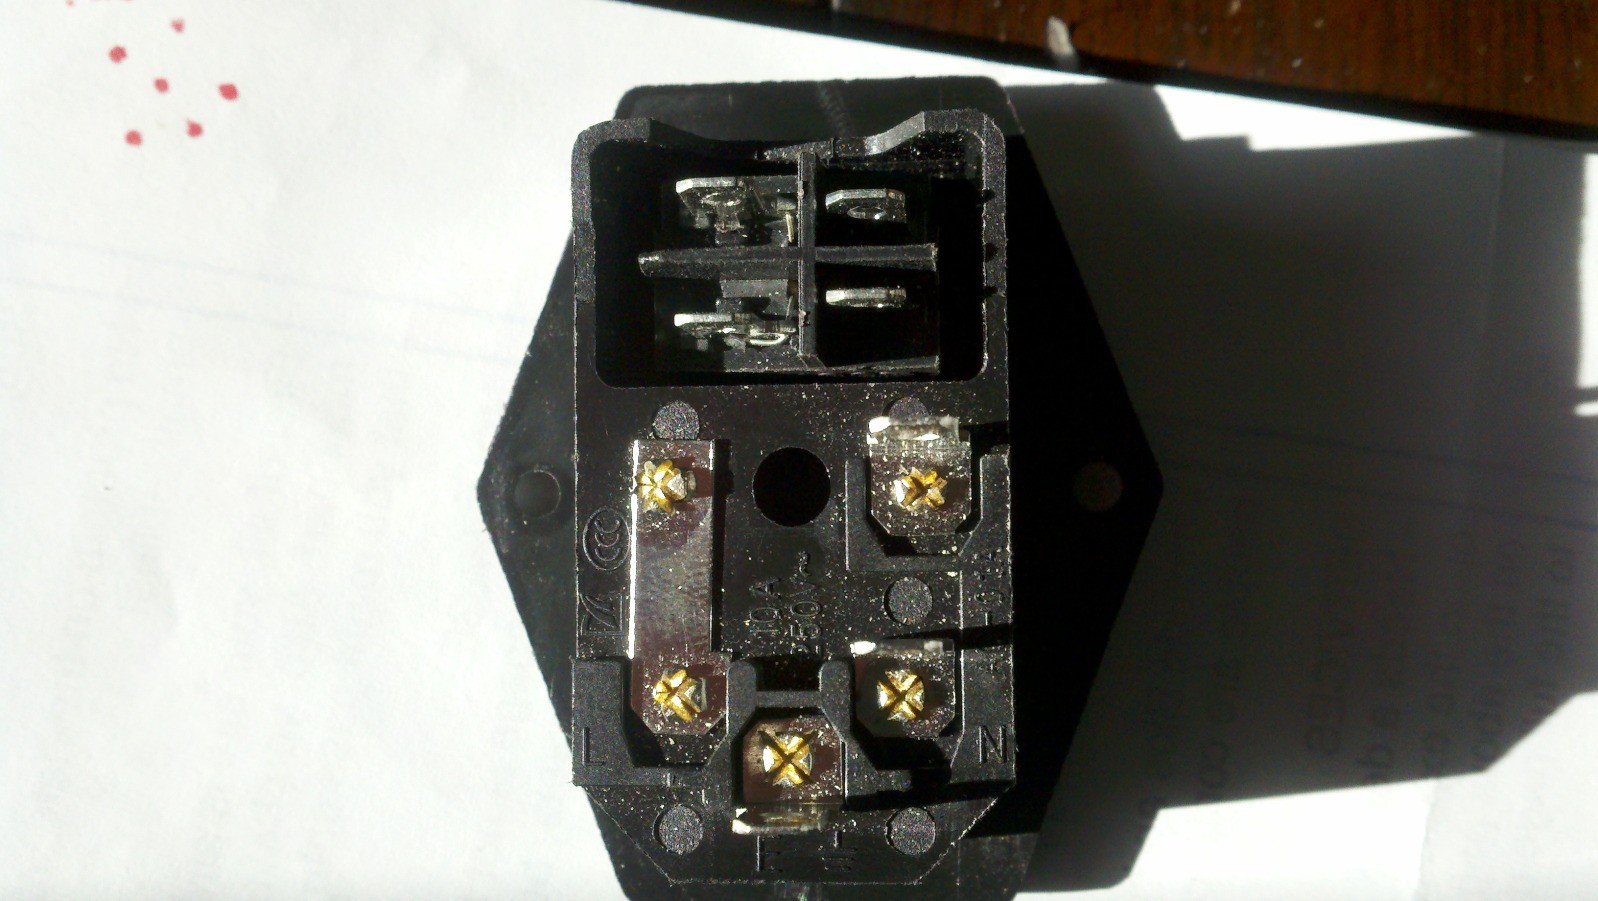 Help with wiring up a IEC320 C14 socket